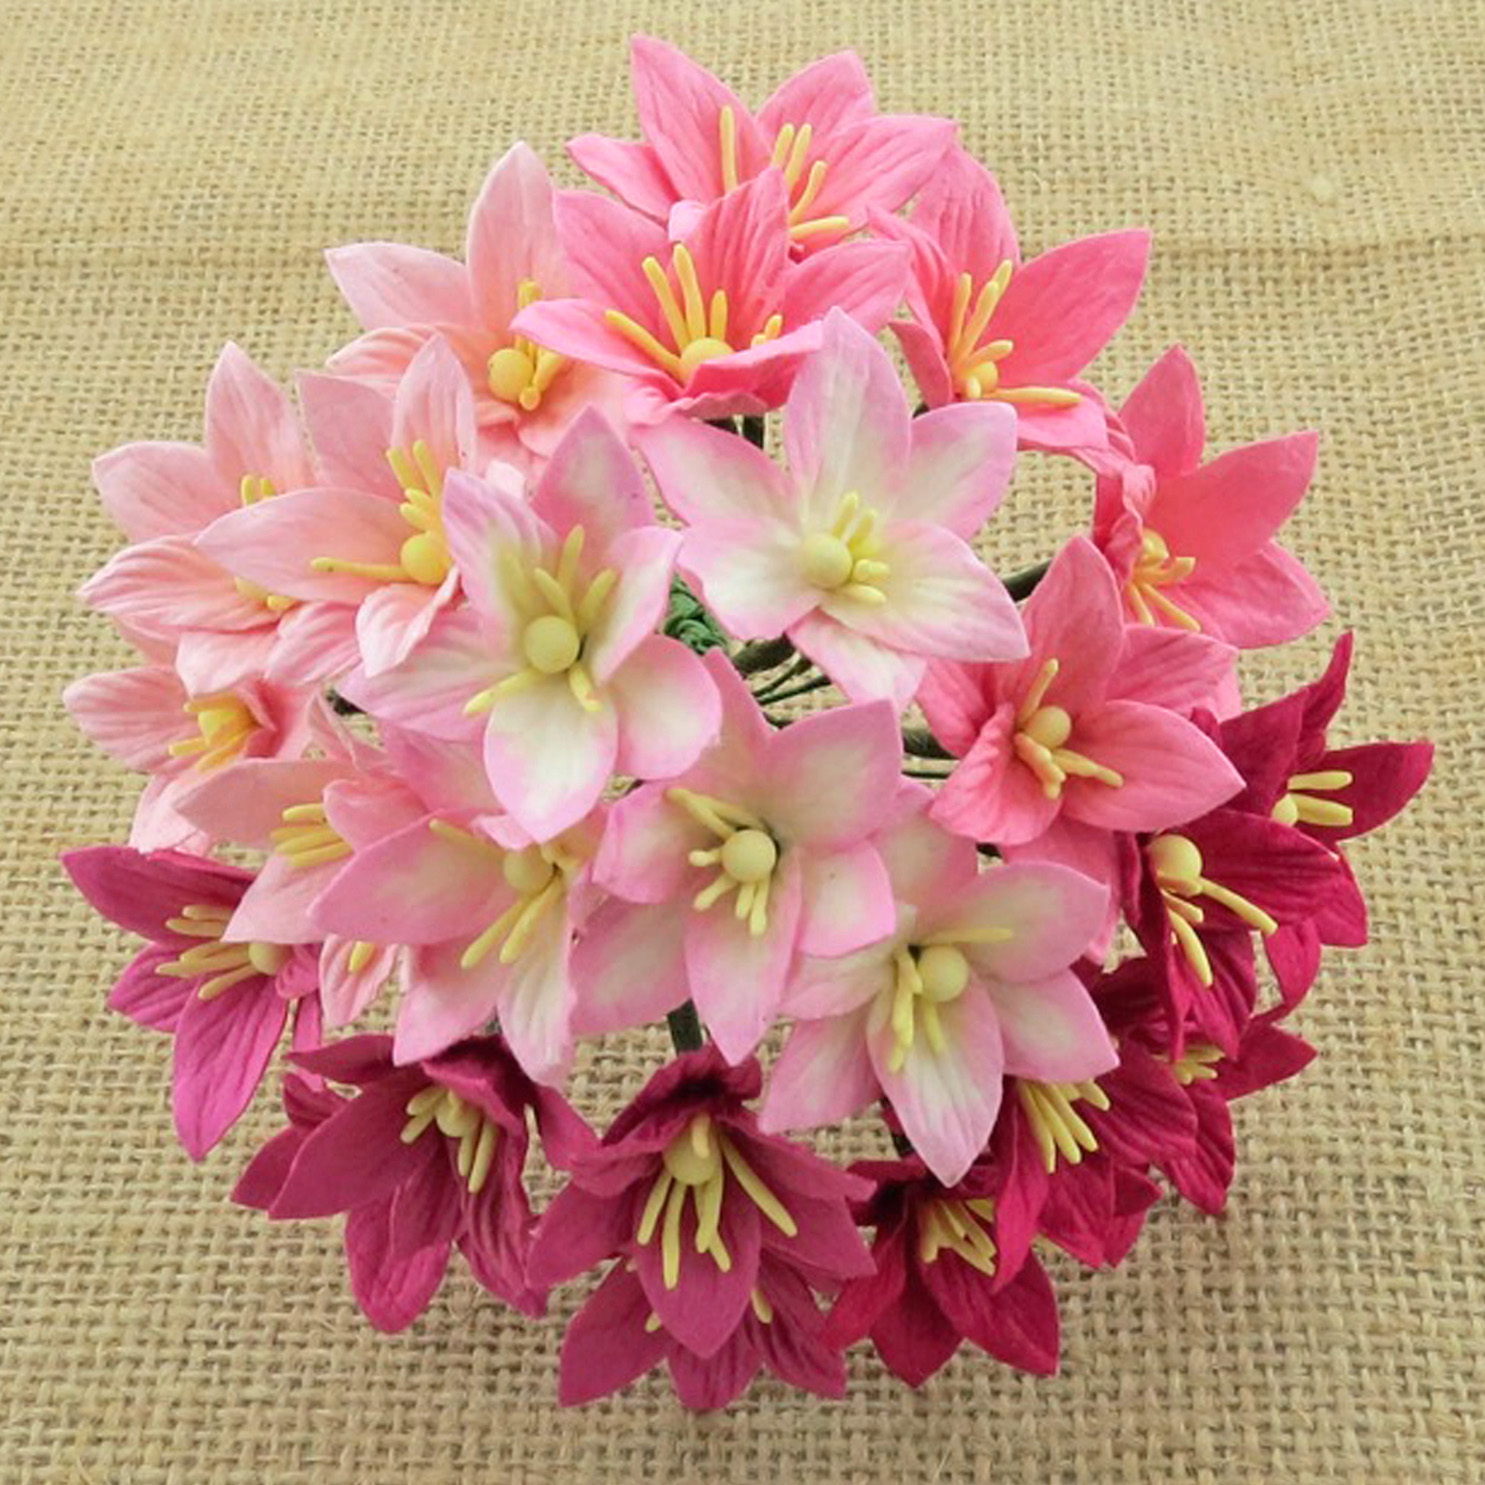 50 MIXED PINK MULBERRY PAPER LILY FLOWERS - 5 COLOR